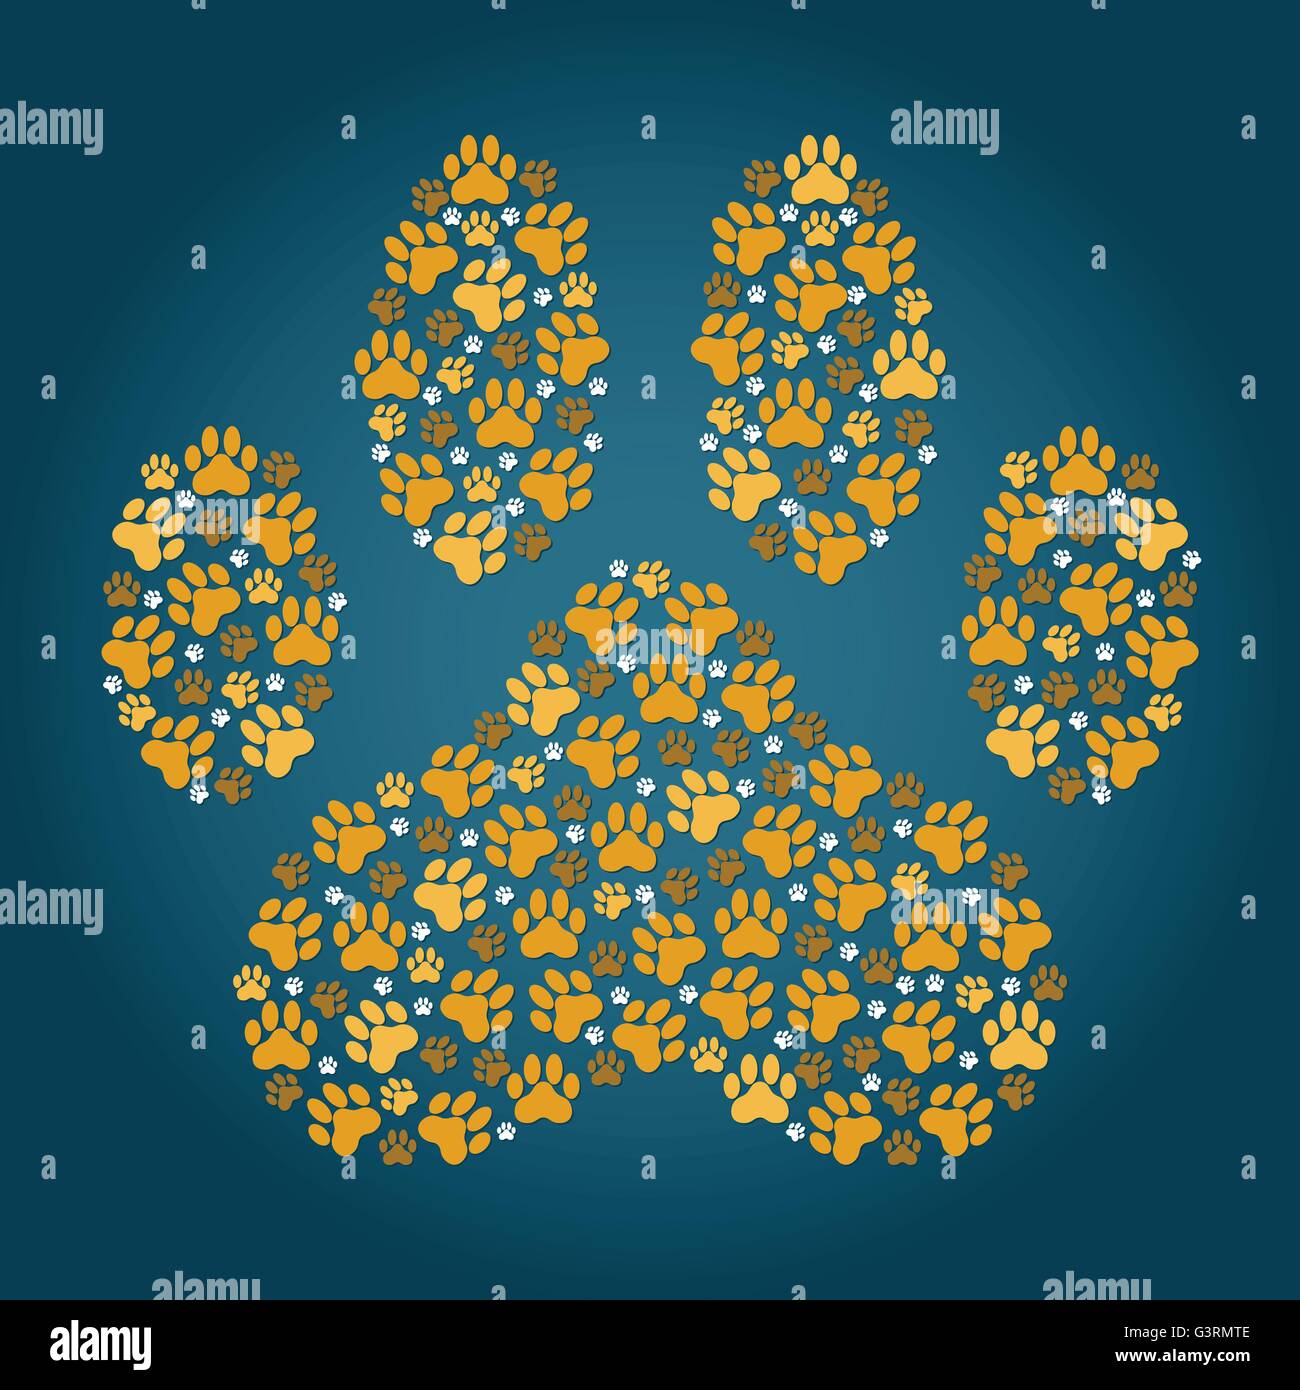 large paw print made up of smaller paw prints Stock Vector